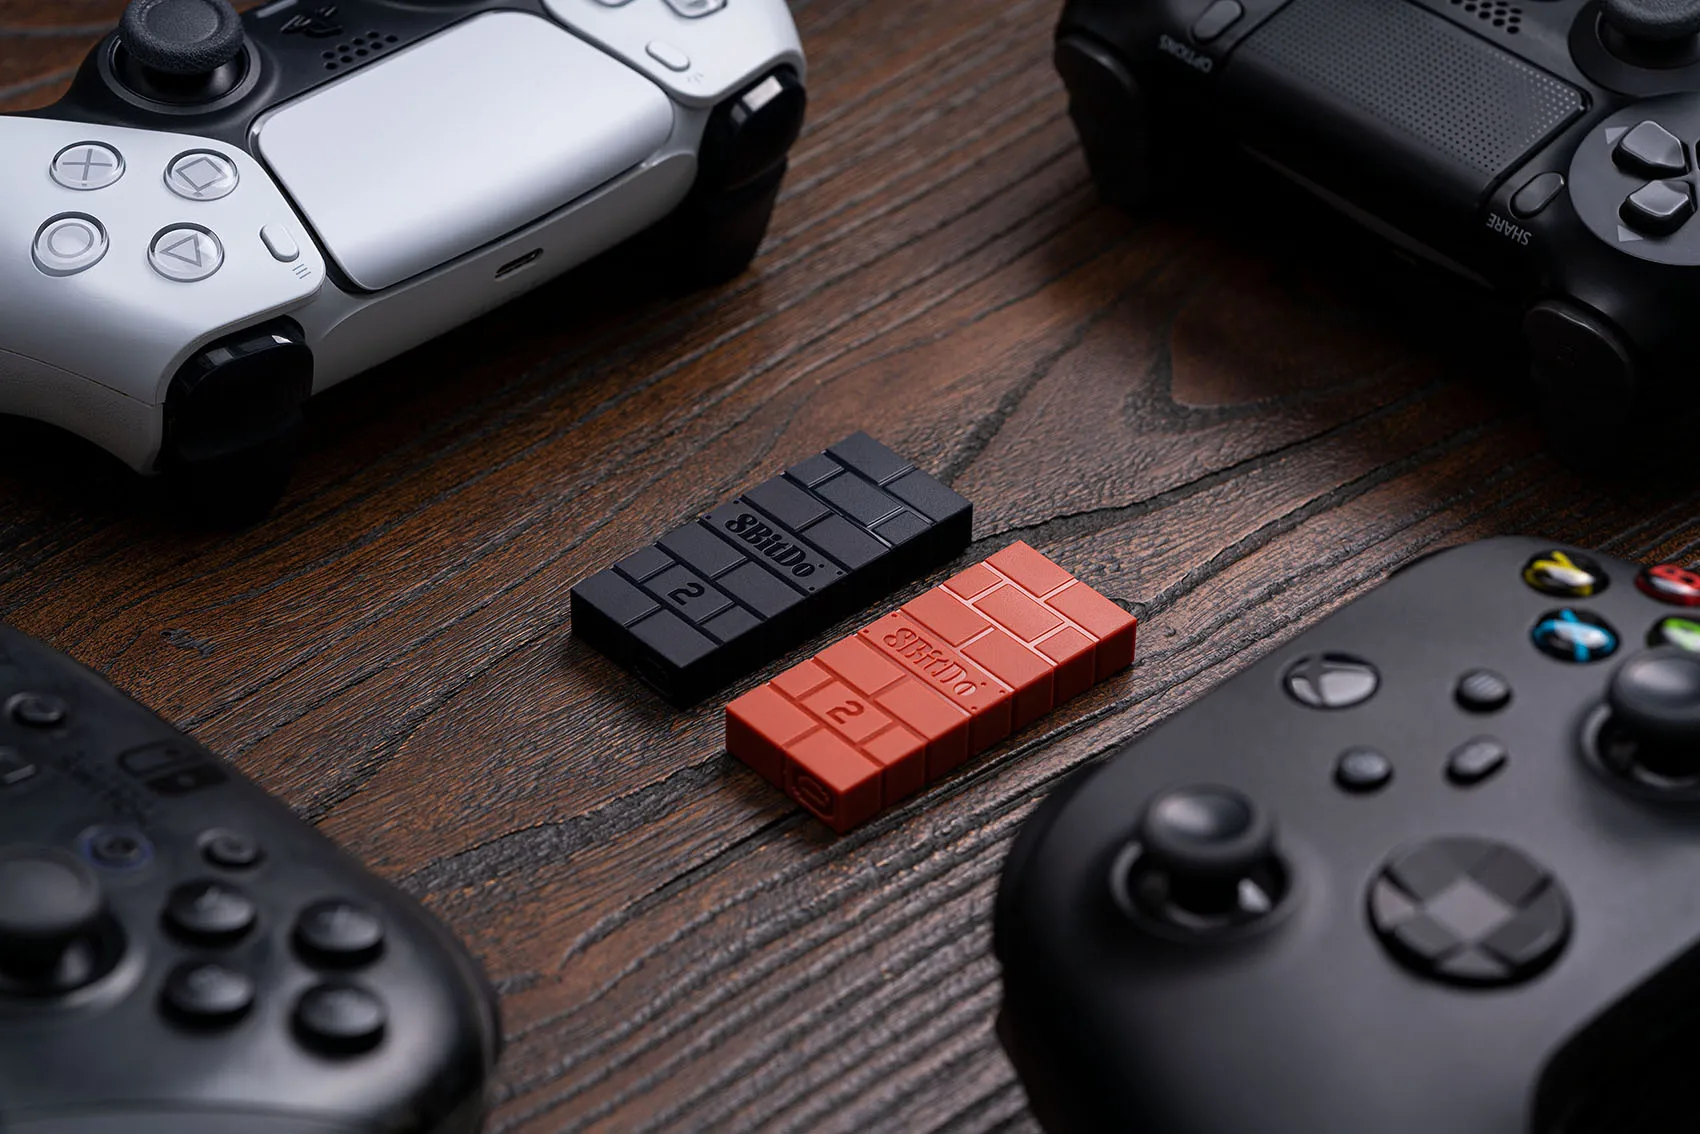  8Bitdo Wireless USB Adapter for Switch, Windows, Mac &  Raspberry Pi - Compatible with Xbox, PS5 Controllers : Video Games